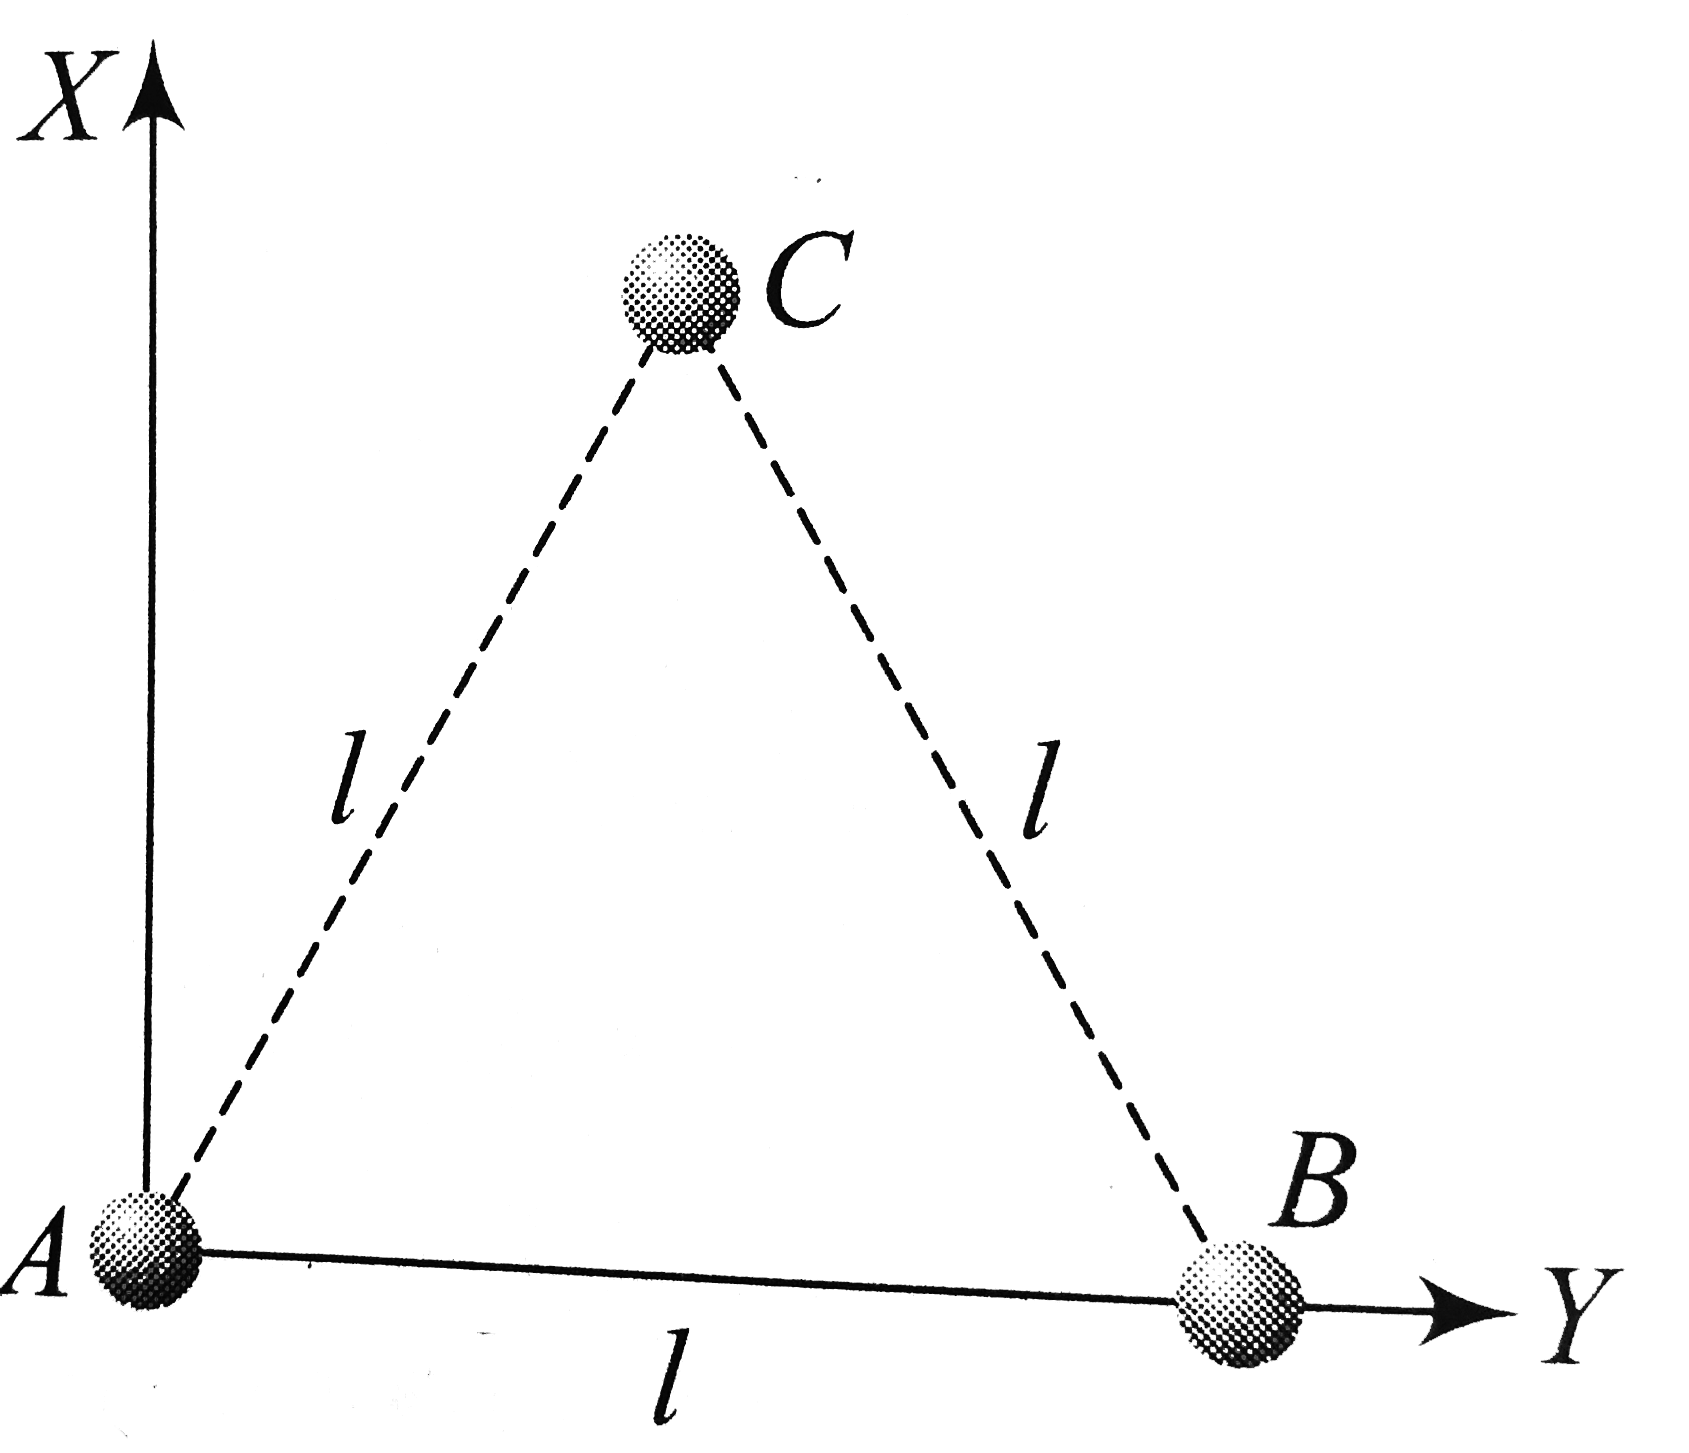 Three particles, each of mass m grams situated at the vertices of an equilateral triangle AbC of side I cm (as shown in the figure). The moment of inertia of the system about a line AX perpendicular to AB and  in the plane of ABC, in gram-cm^2  units will be.   .